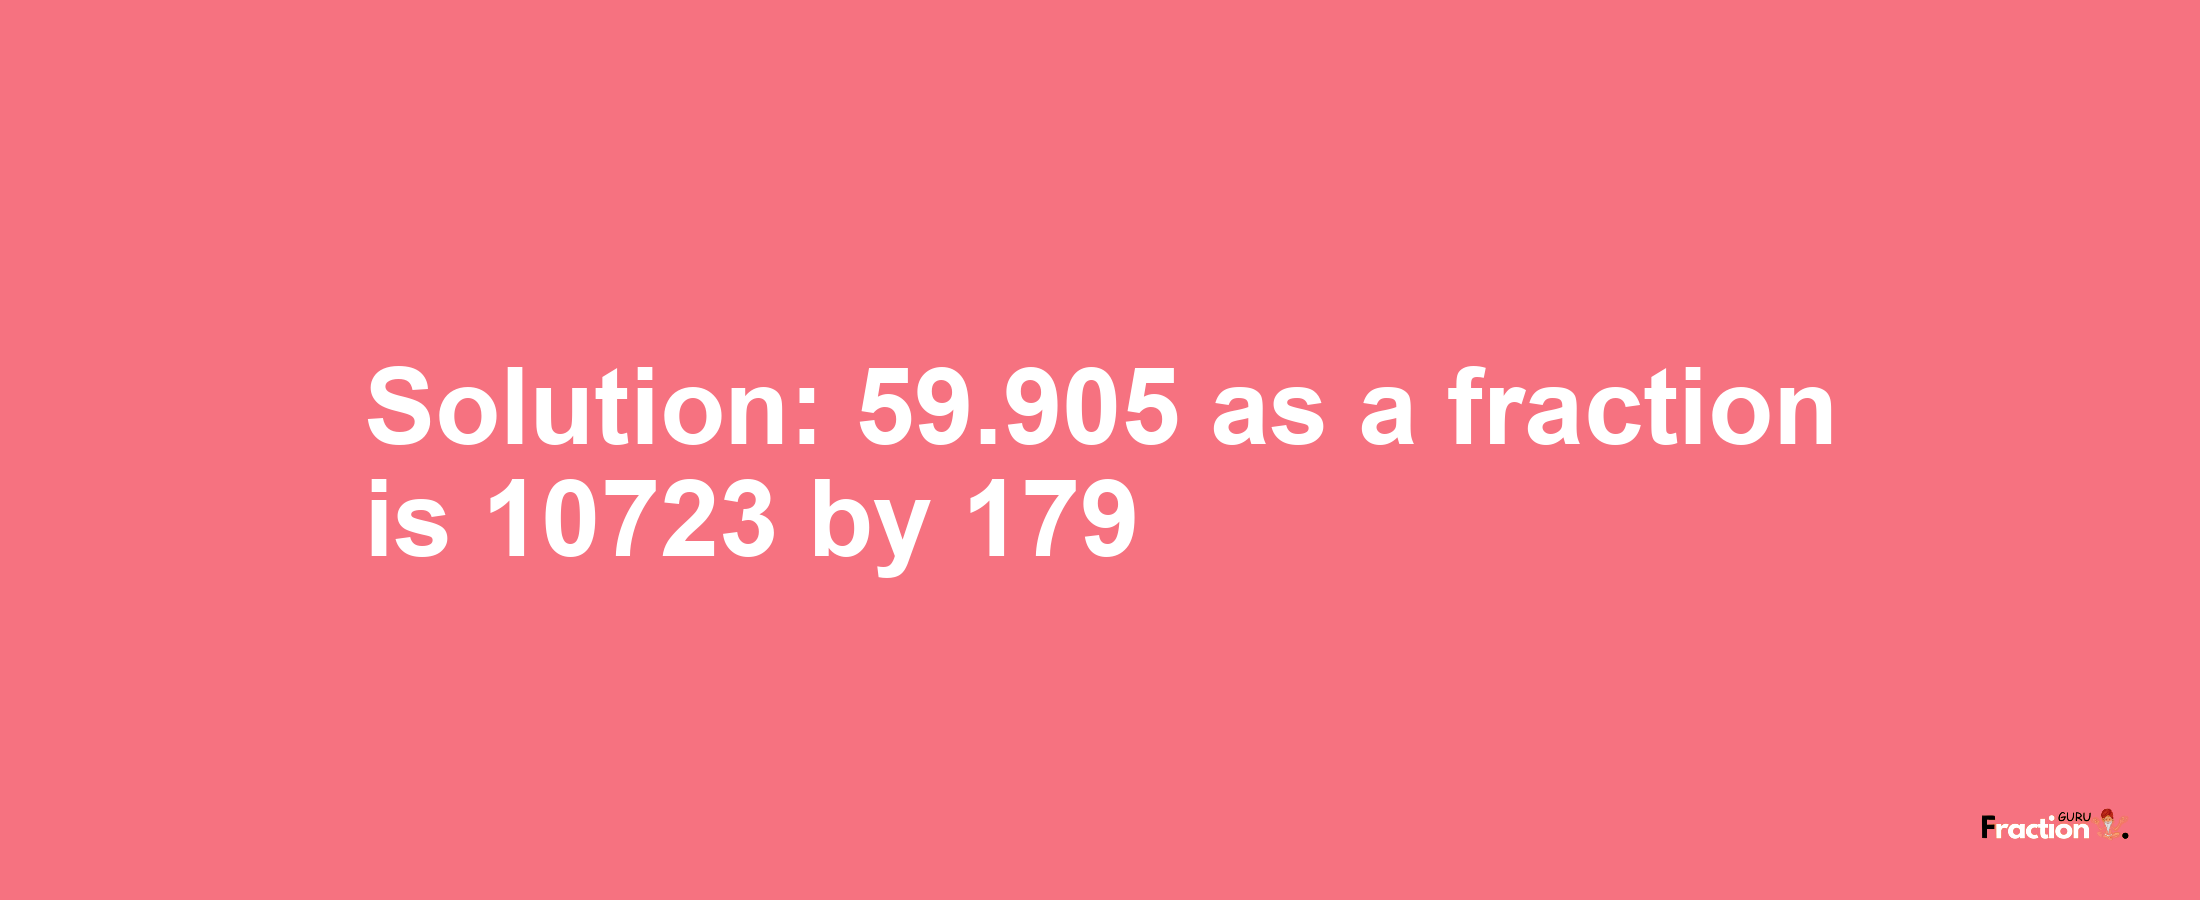 Solution:59.905 as a fraction is 10723/179